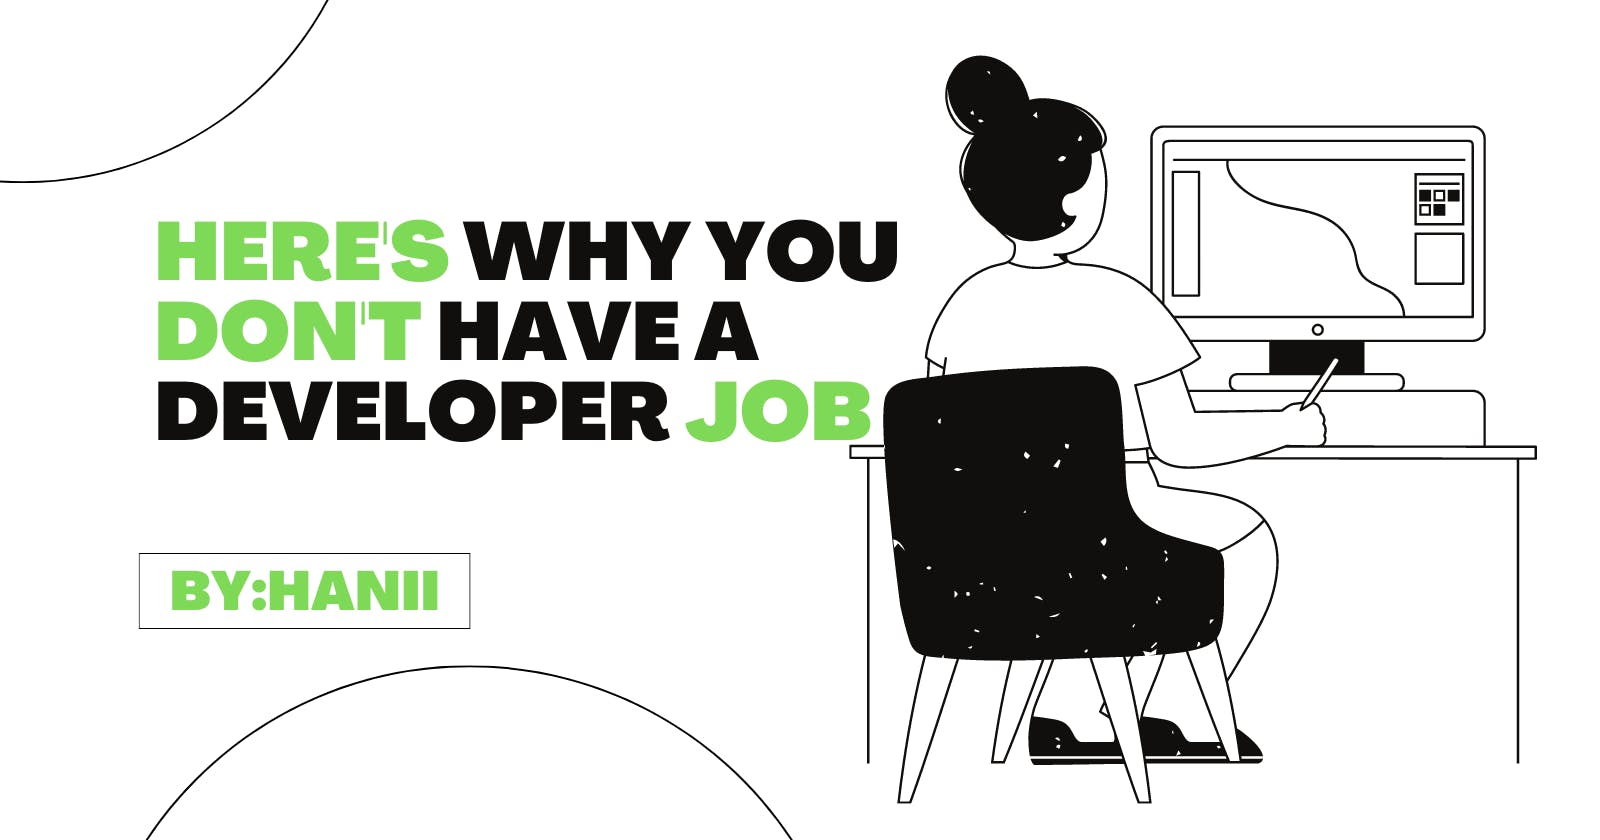 Here's why you don't have a developer job 🧵